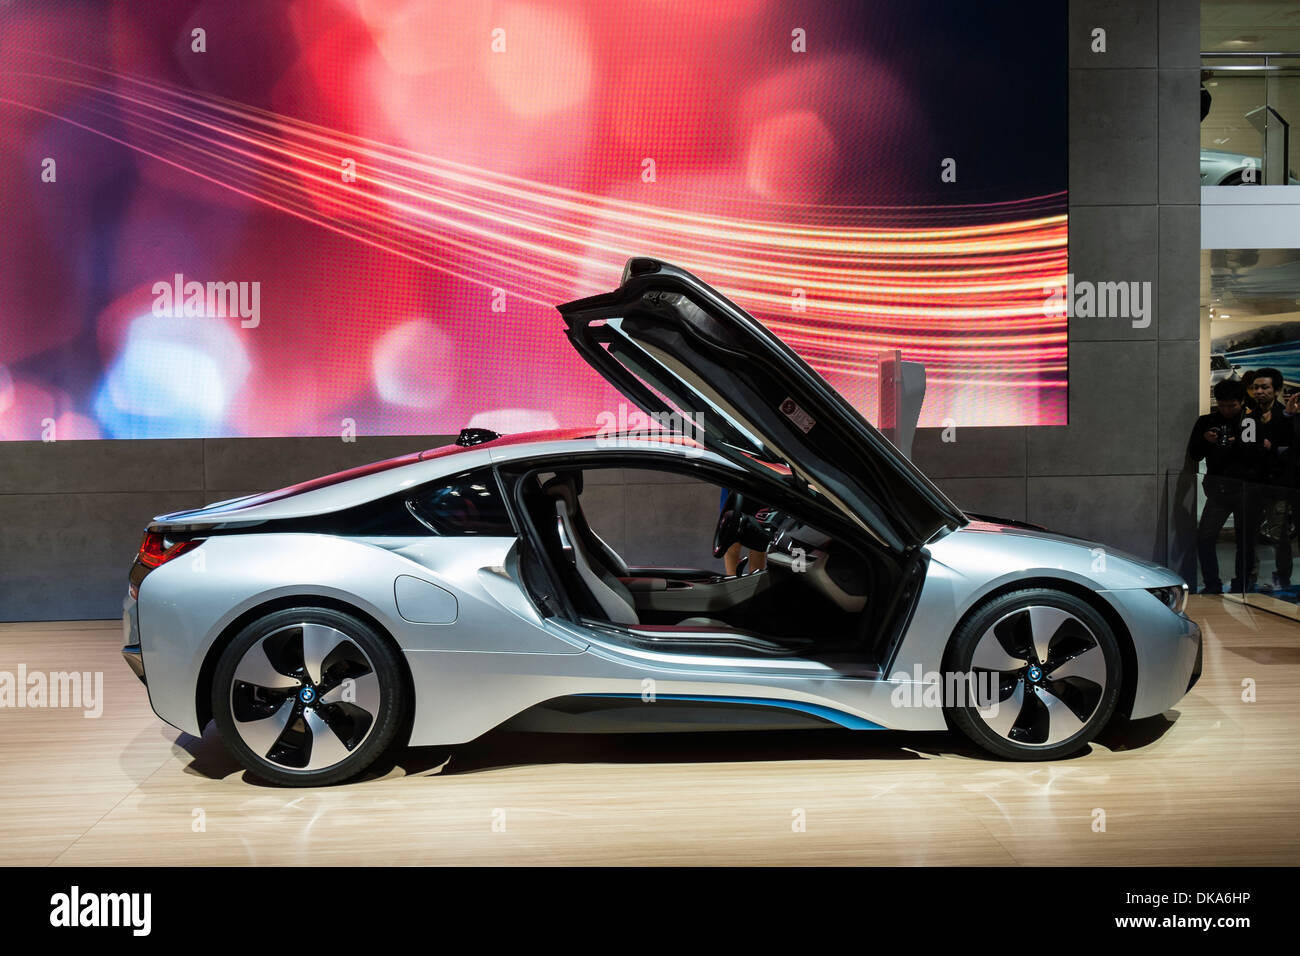 BMW i8 plug-in hybrid electric car at Tokyo Motor Show 2013 in Japan Stock Photo